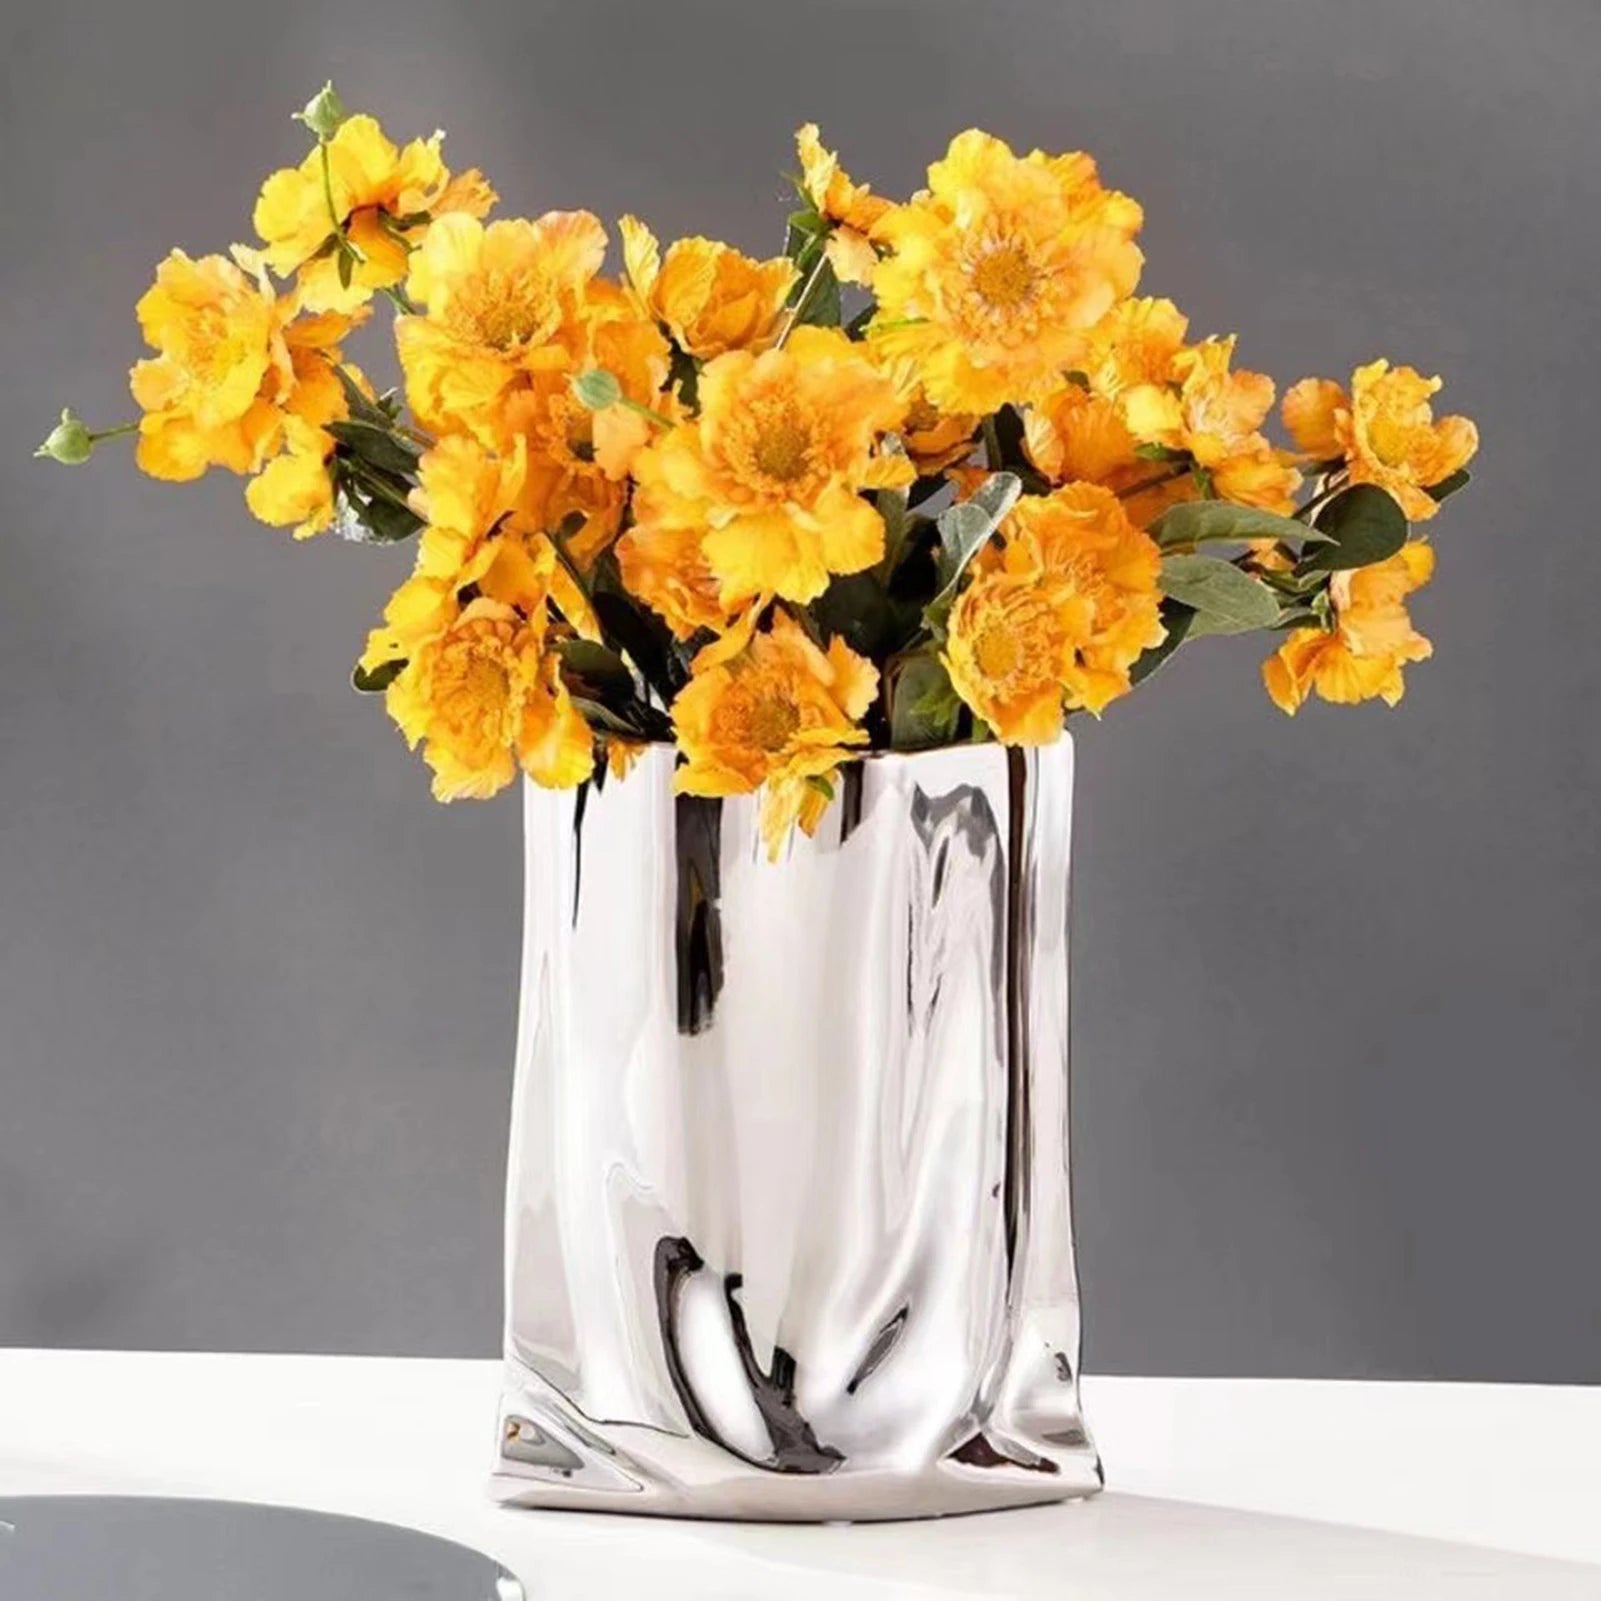 Ceramic Flower Vase Large Capacity Gold & Silver Centerpiece Vases for Party Home Bedroom Dining Table Decor